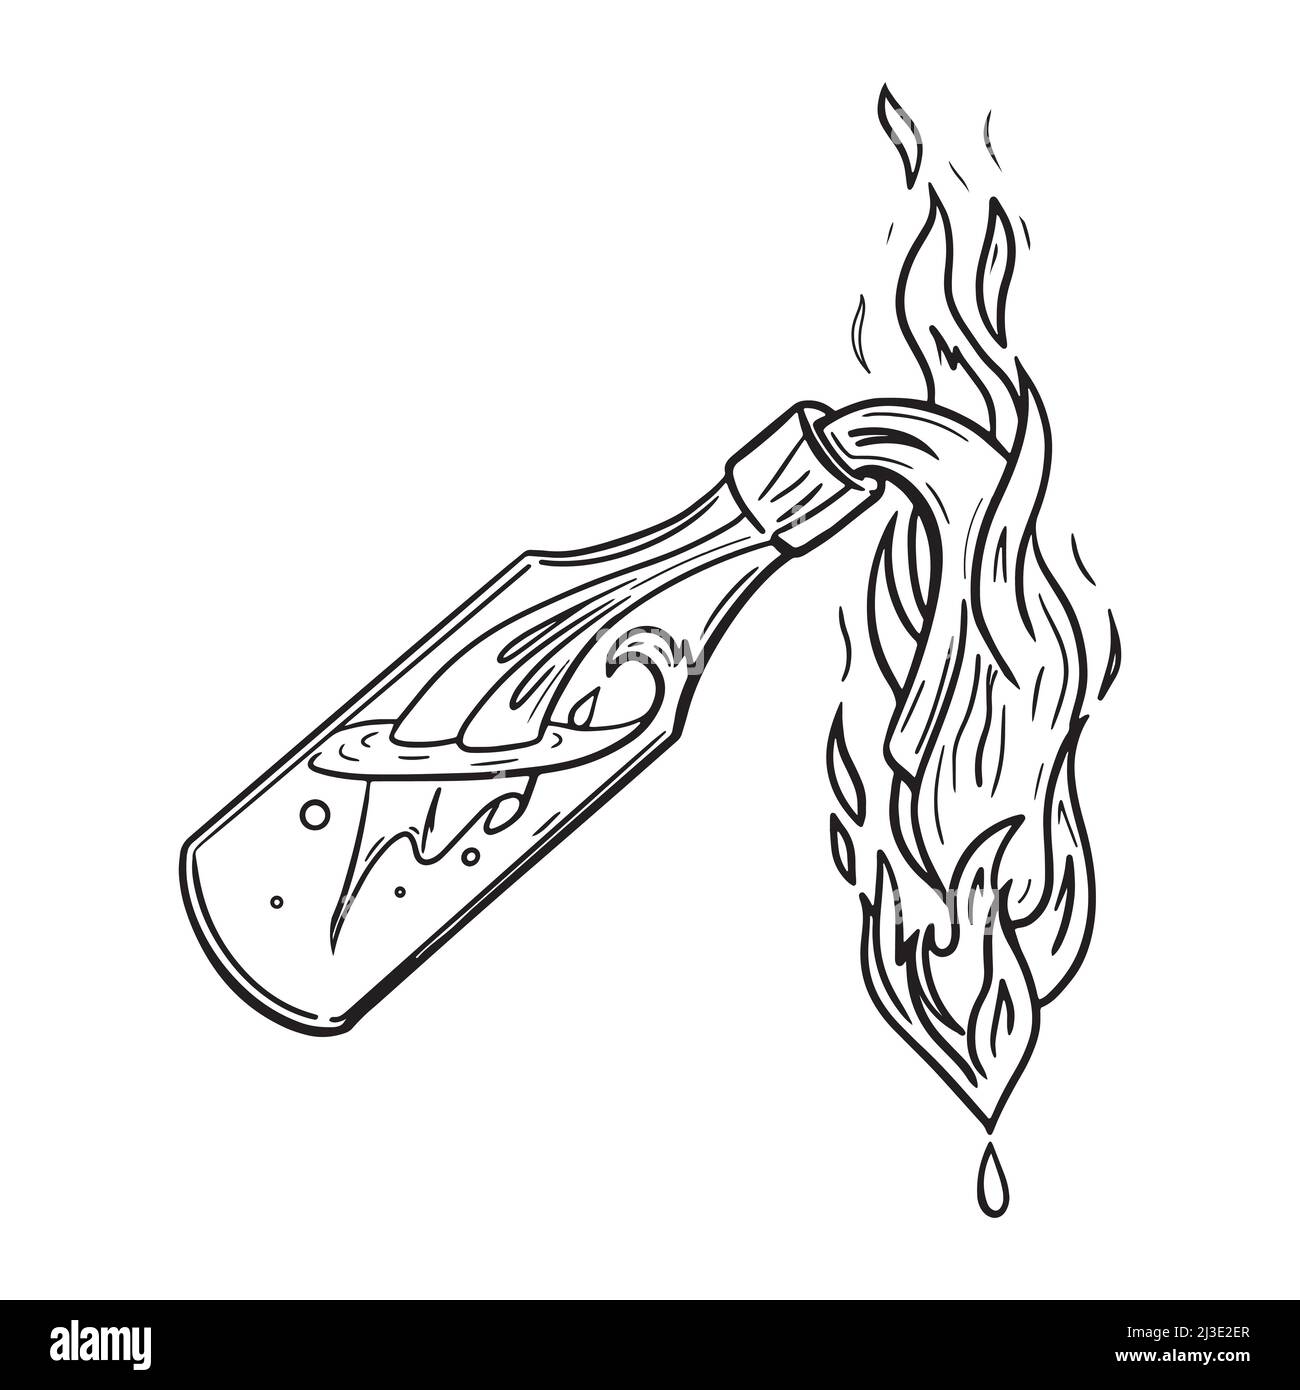 Bottle of Cocktail Molotov. Symbol of Ukrainian Resistance against Russian Aggression Stock Vector